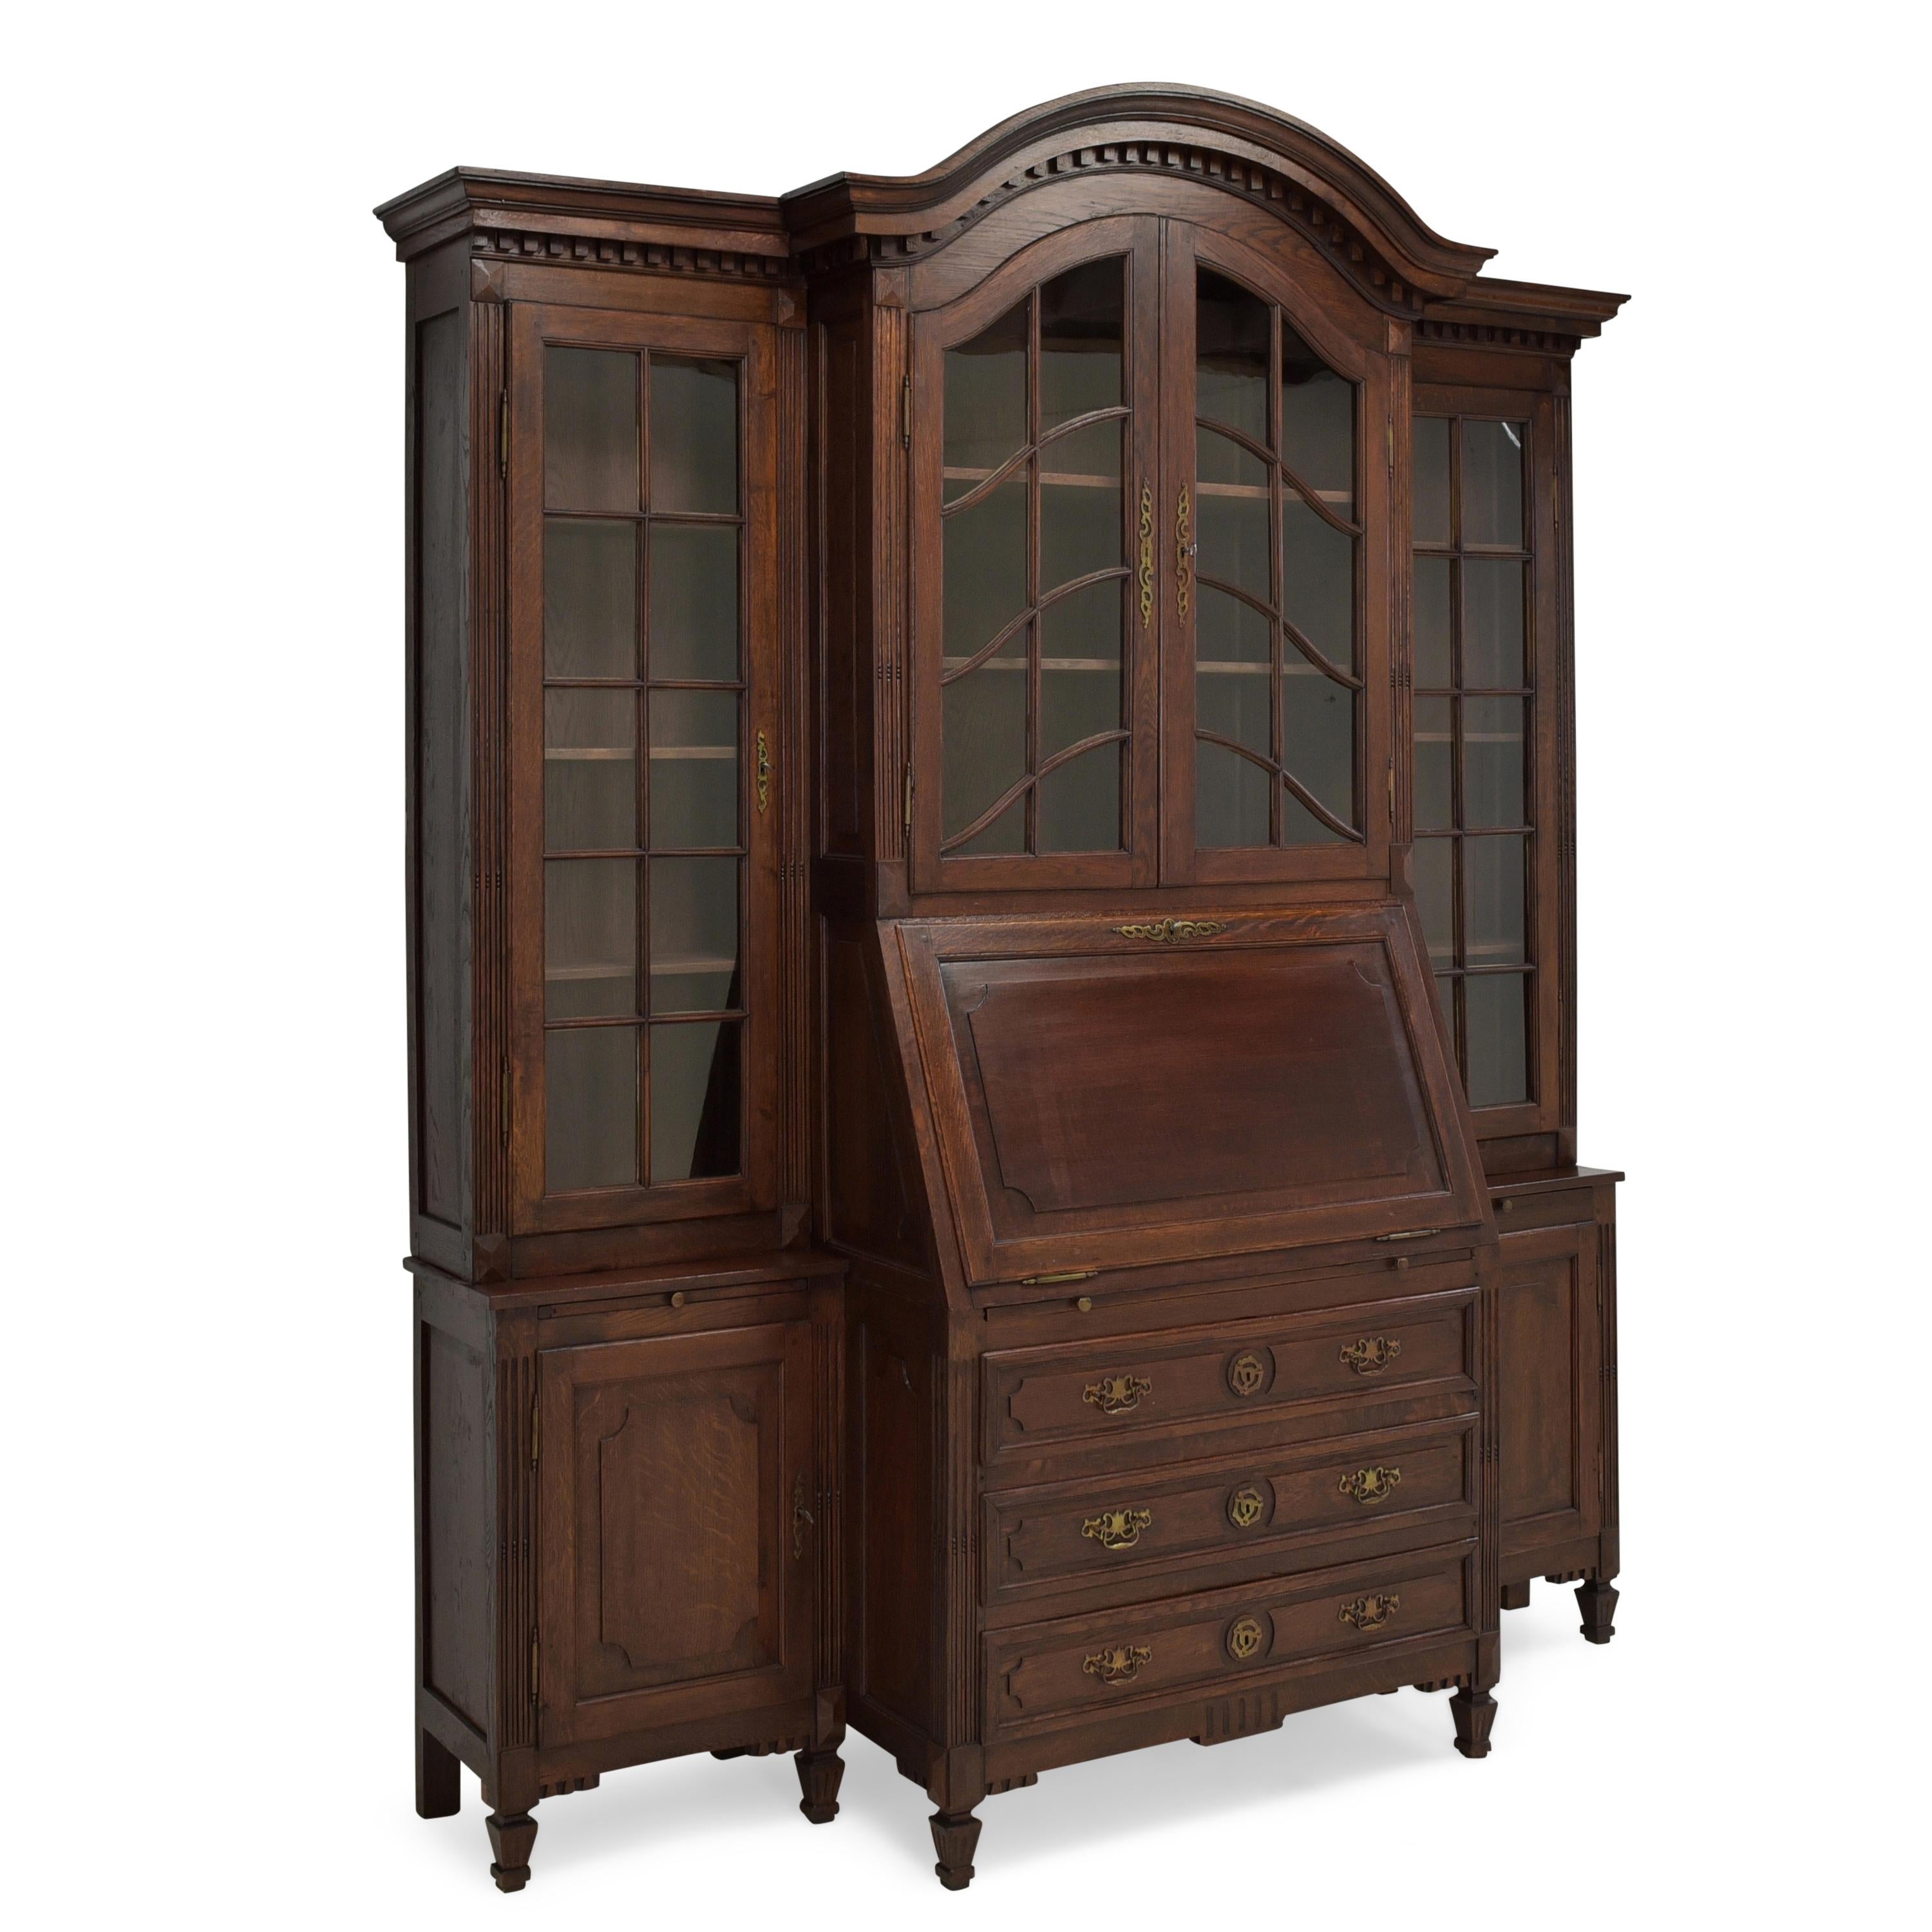 Large display cabinet with secretary restored oak bookcase

Features:
Six-door model with secretaire with three drawers and two extension leaves
Very high quality processing
All drawers dovetailed
Shelves of the upper part are